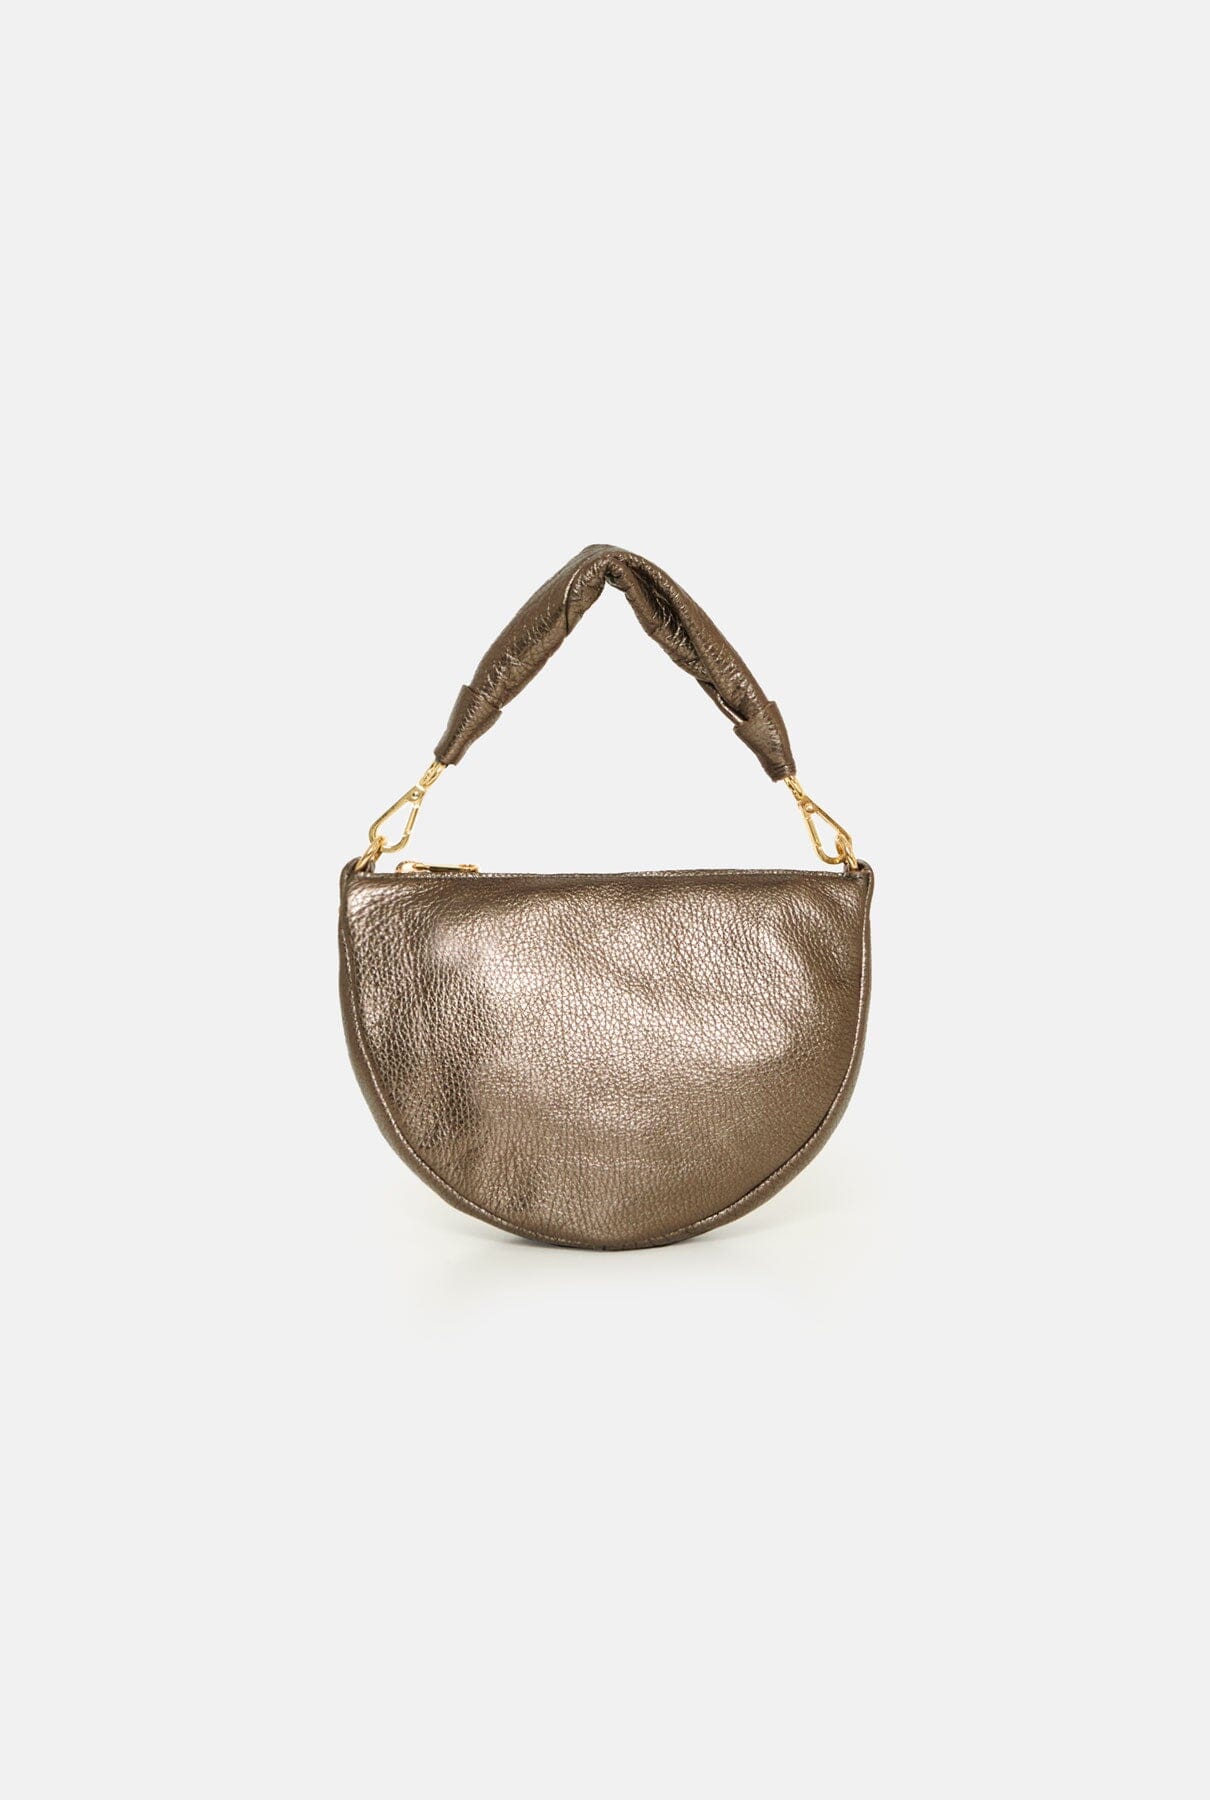 The Baby Gondola Piel Metalizada Bronce Hand bags The Bag Lab 